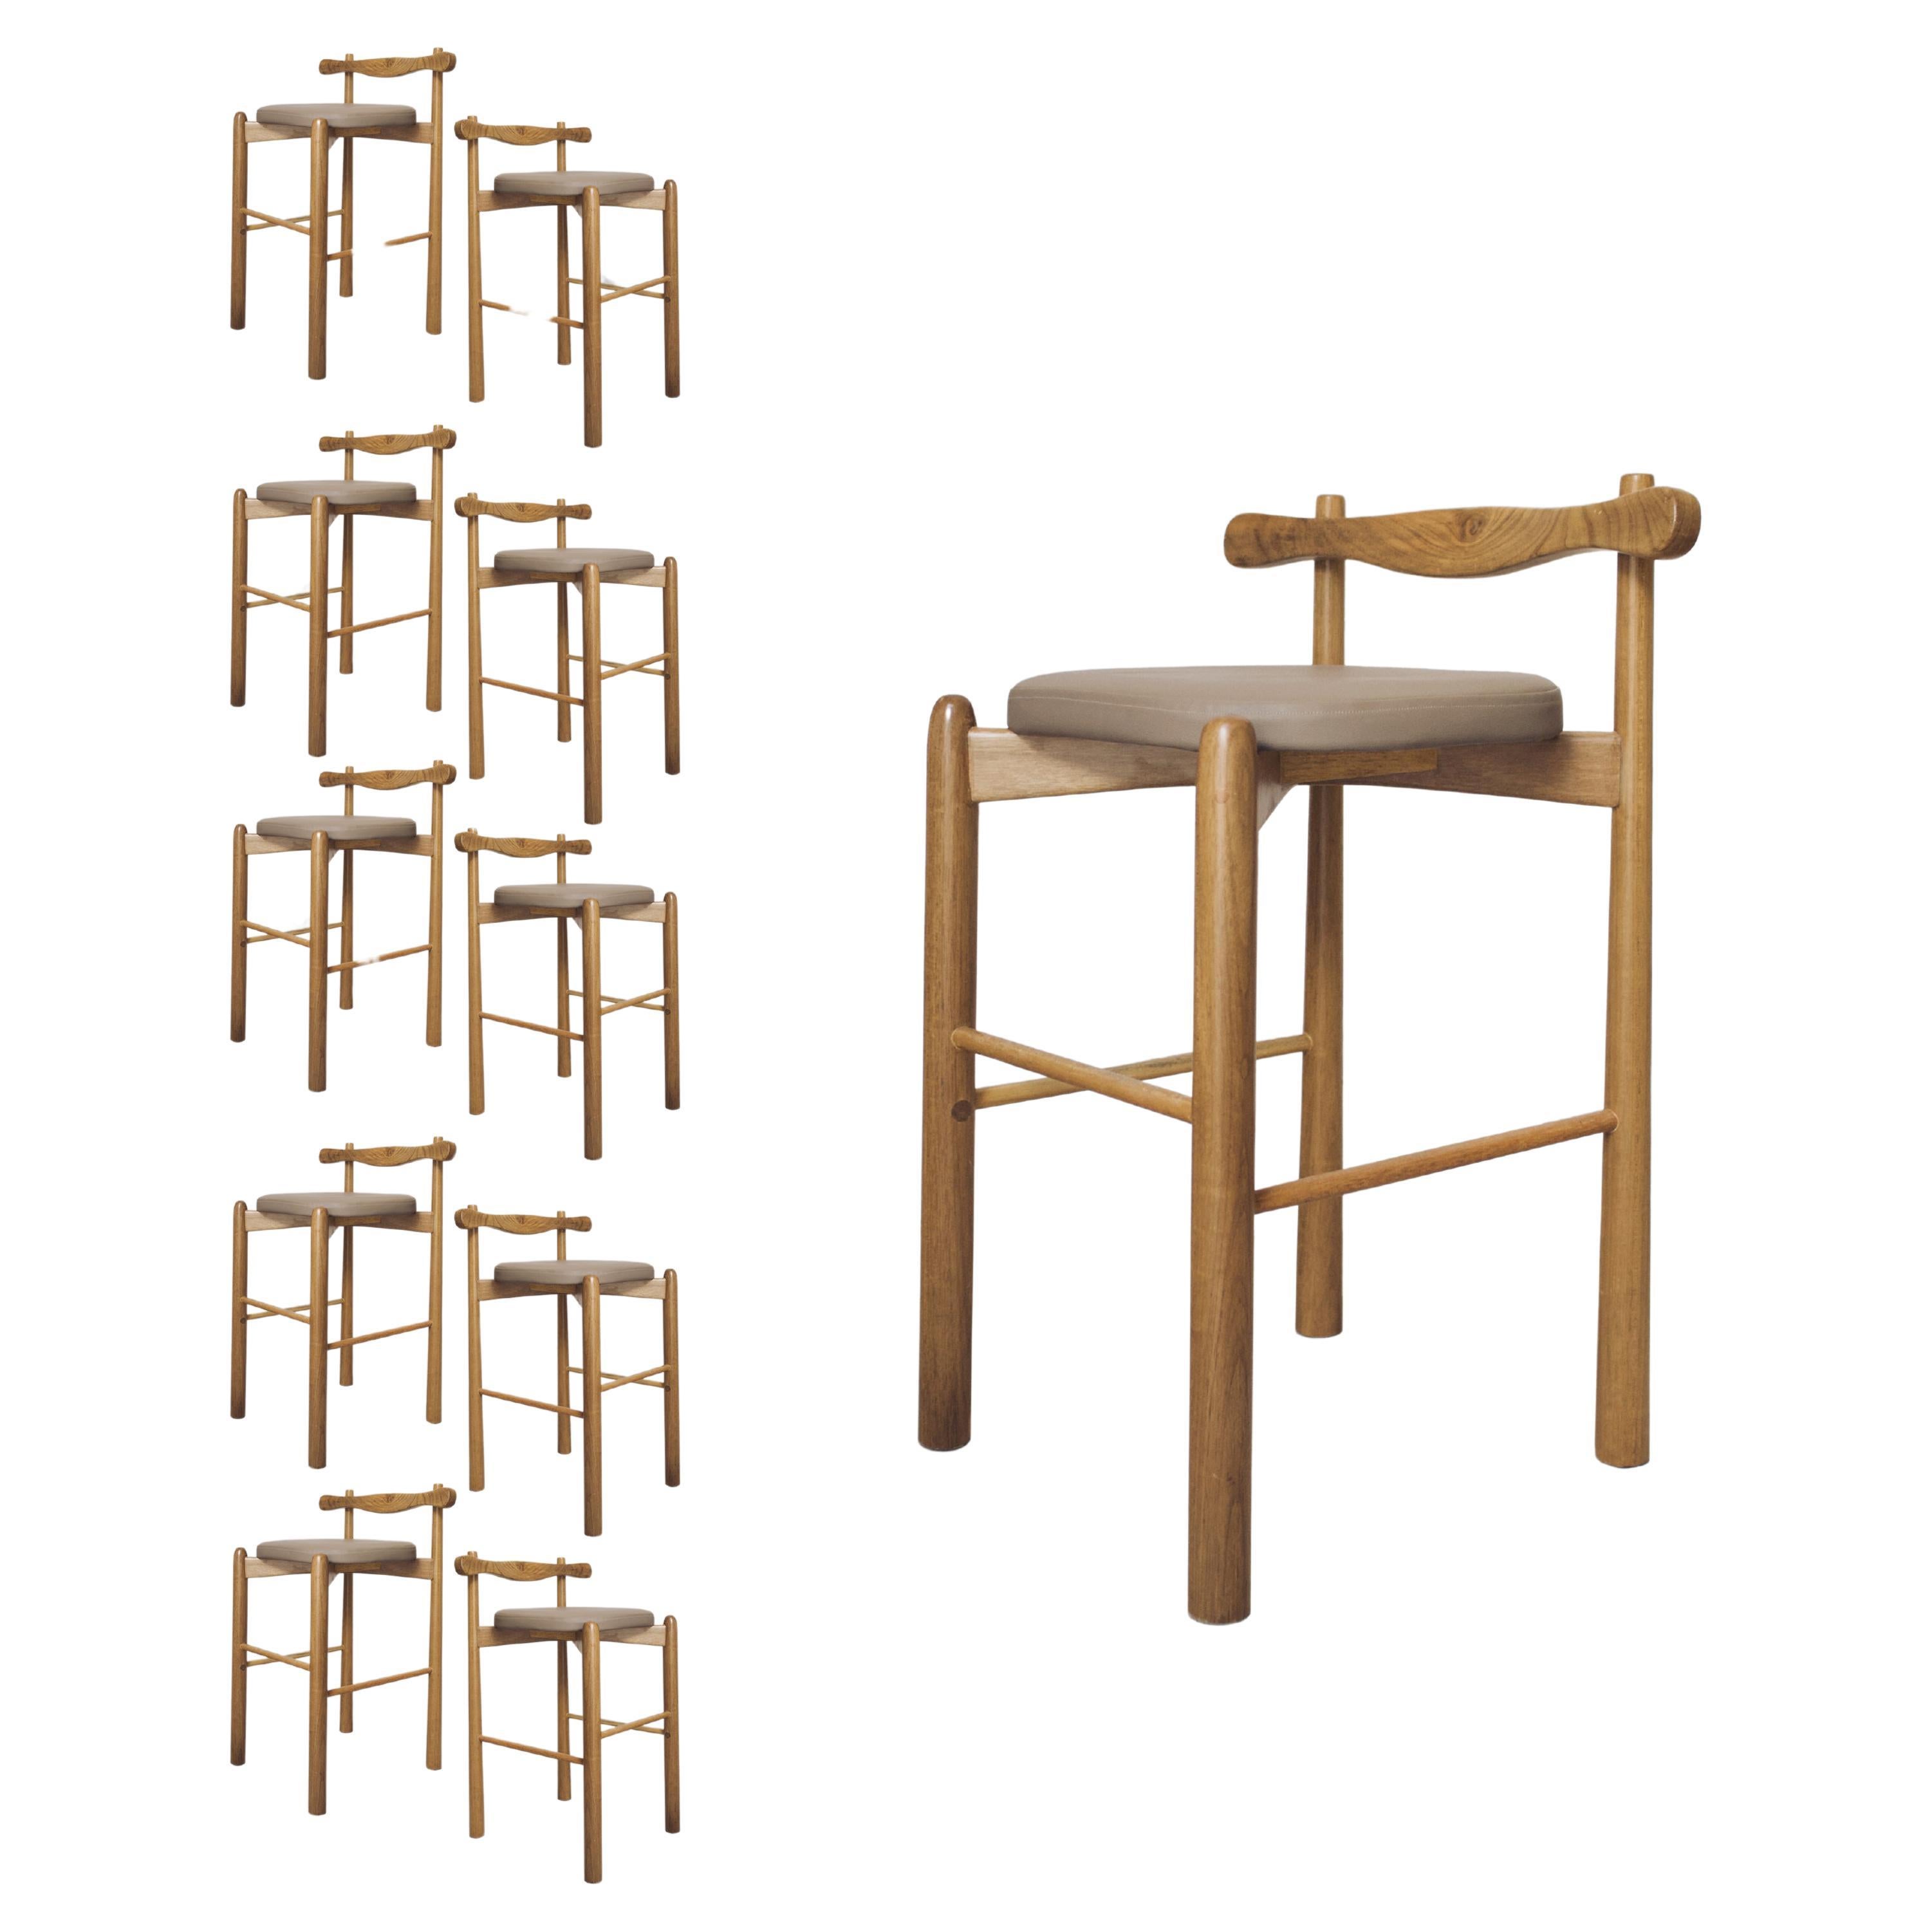 Set of 10 Counter Stools Uçá - Brown Light Brown Finish Wood (fabric ref : F04) For Sale